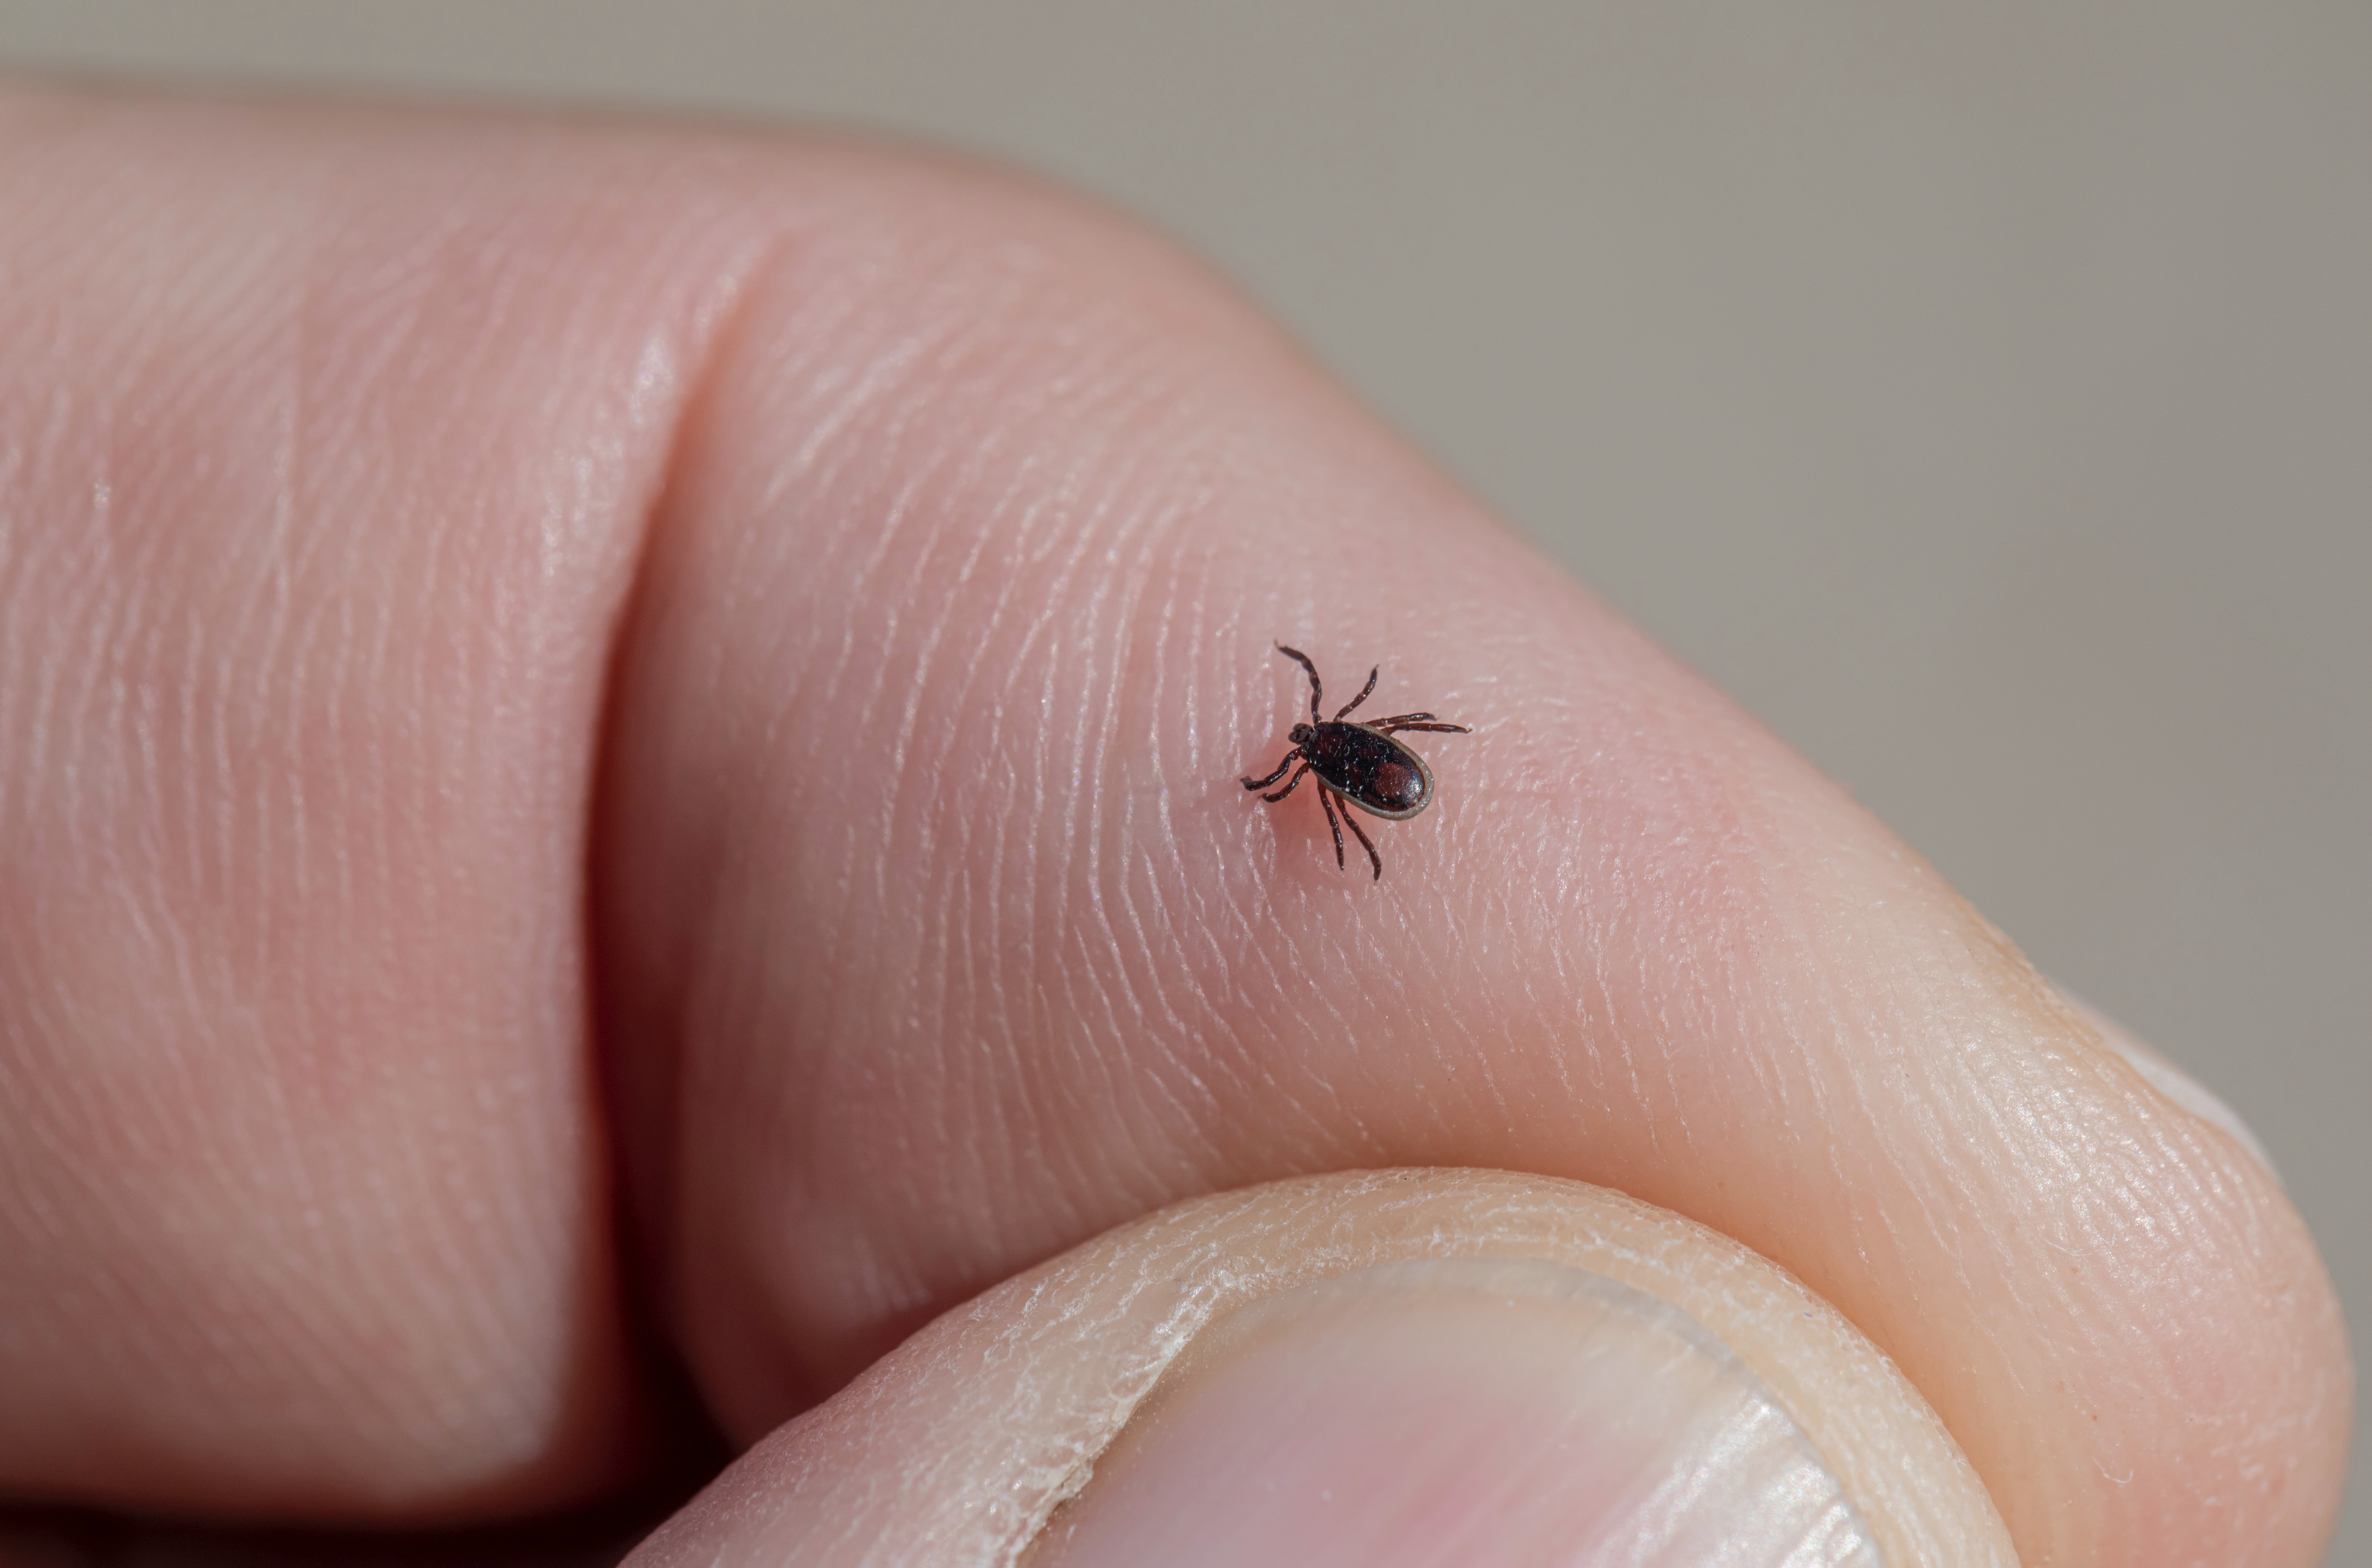 A close up view of a tick on a person's finger